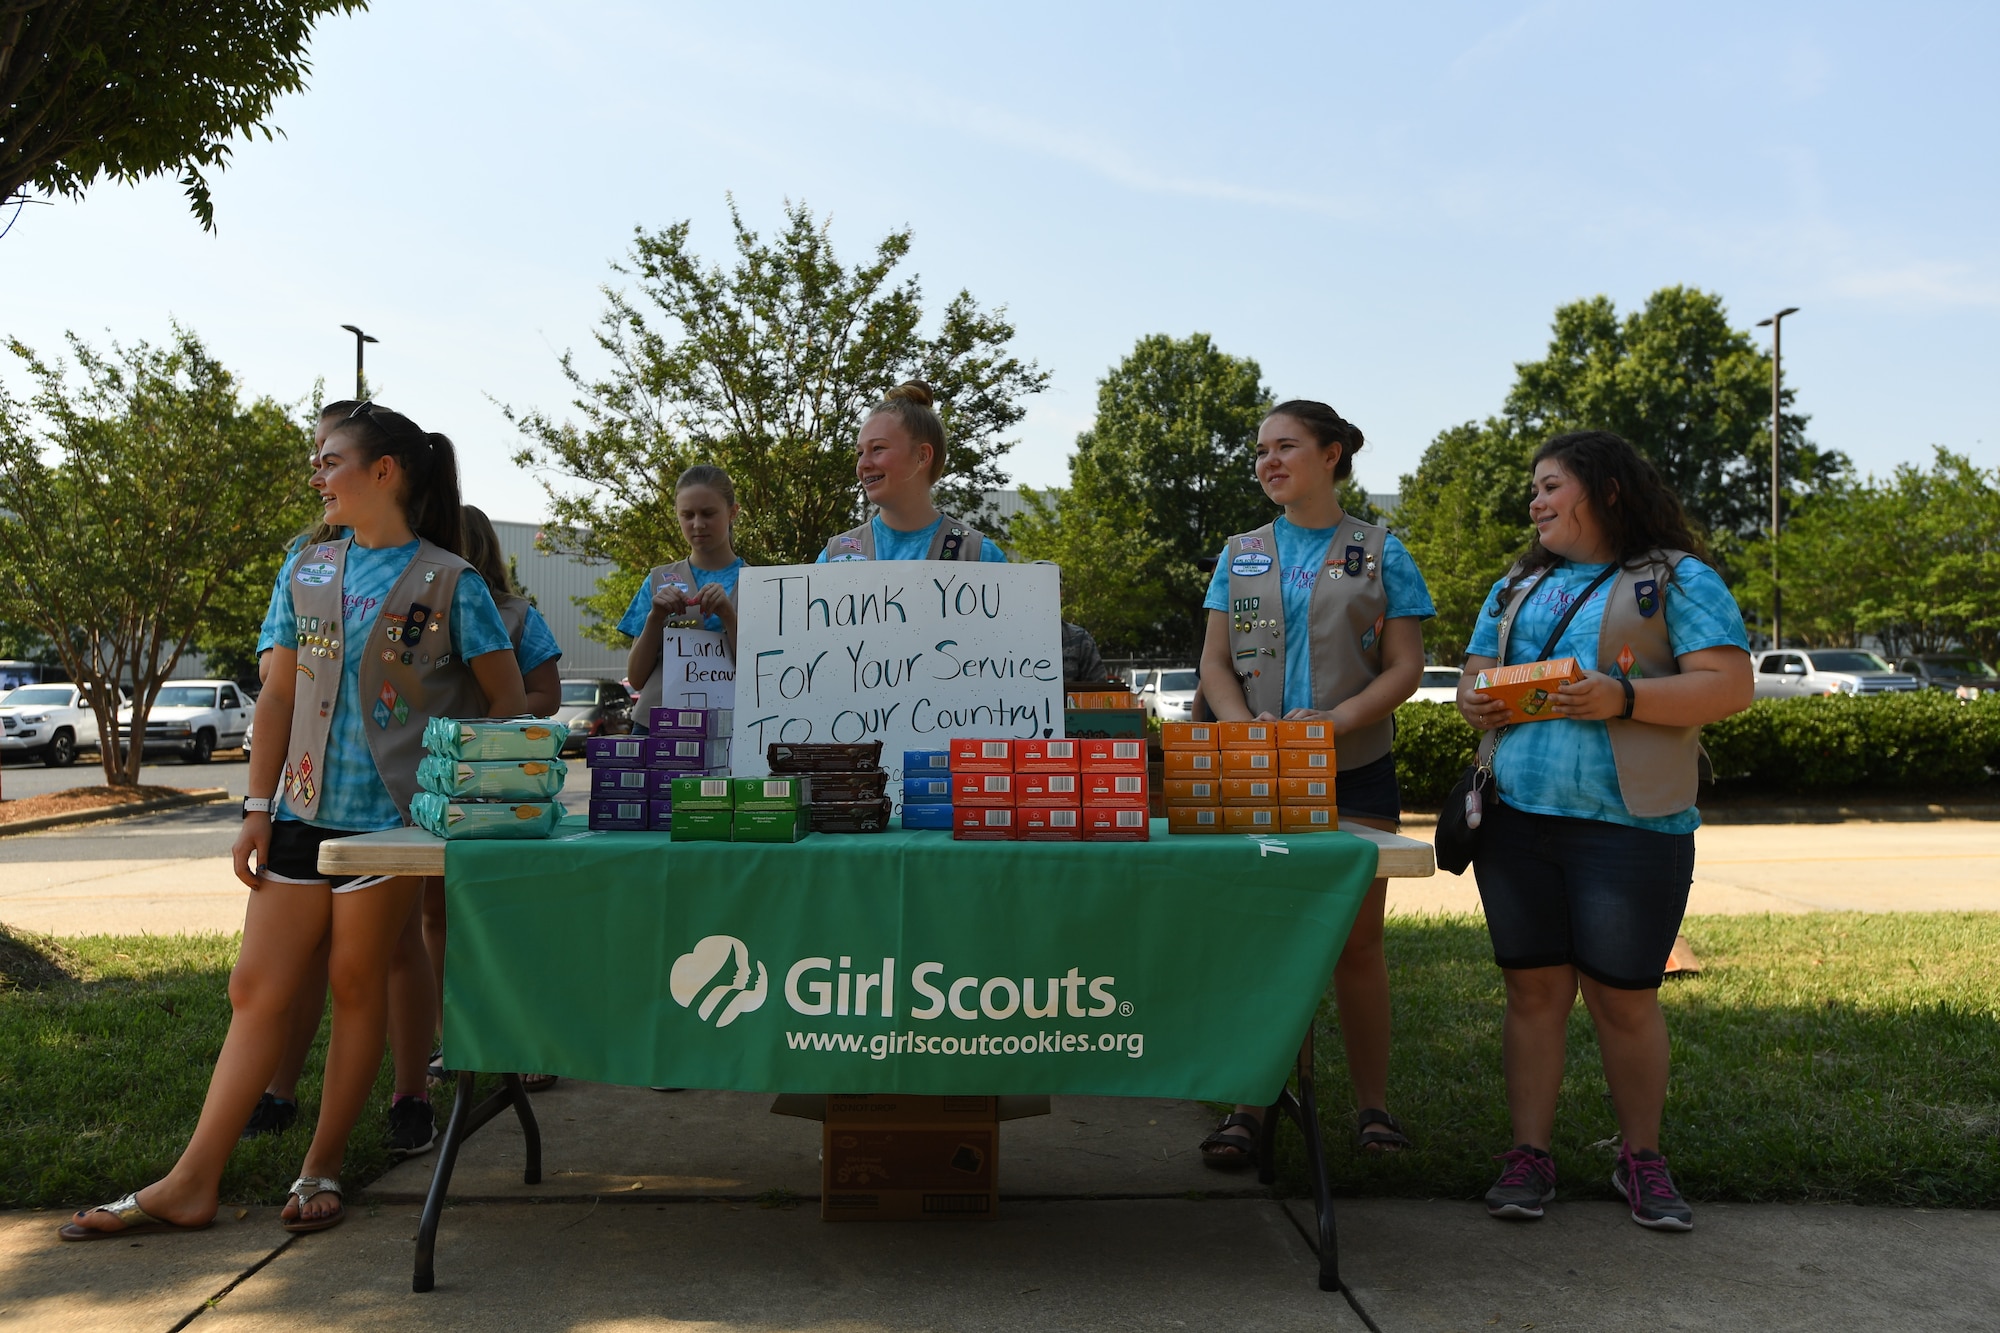 Girl Scouts from Troop 20436 of Denver, N.C., are ready to hand out cookies to Airmen during the fifth annual visit to the North Carolina Air National Guard Base, Charlotte Douglas International Airport, June 9, 2018. This is part of a council-wide service project, called Operation Sweet Treat, where Girl Scouts collect cookies to give to U.S. military members serving in the United States and deployed overseas.